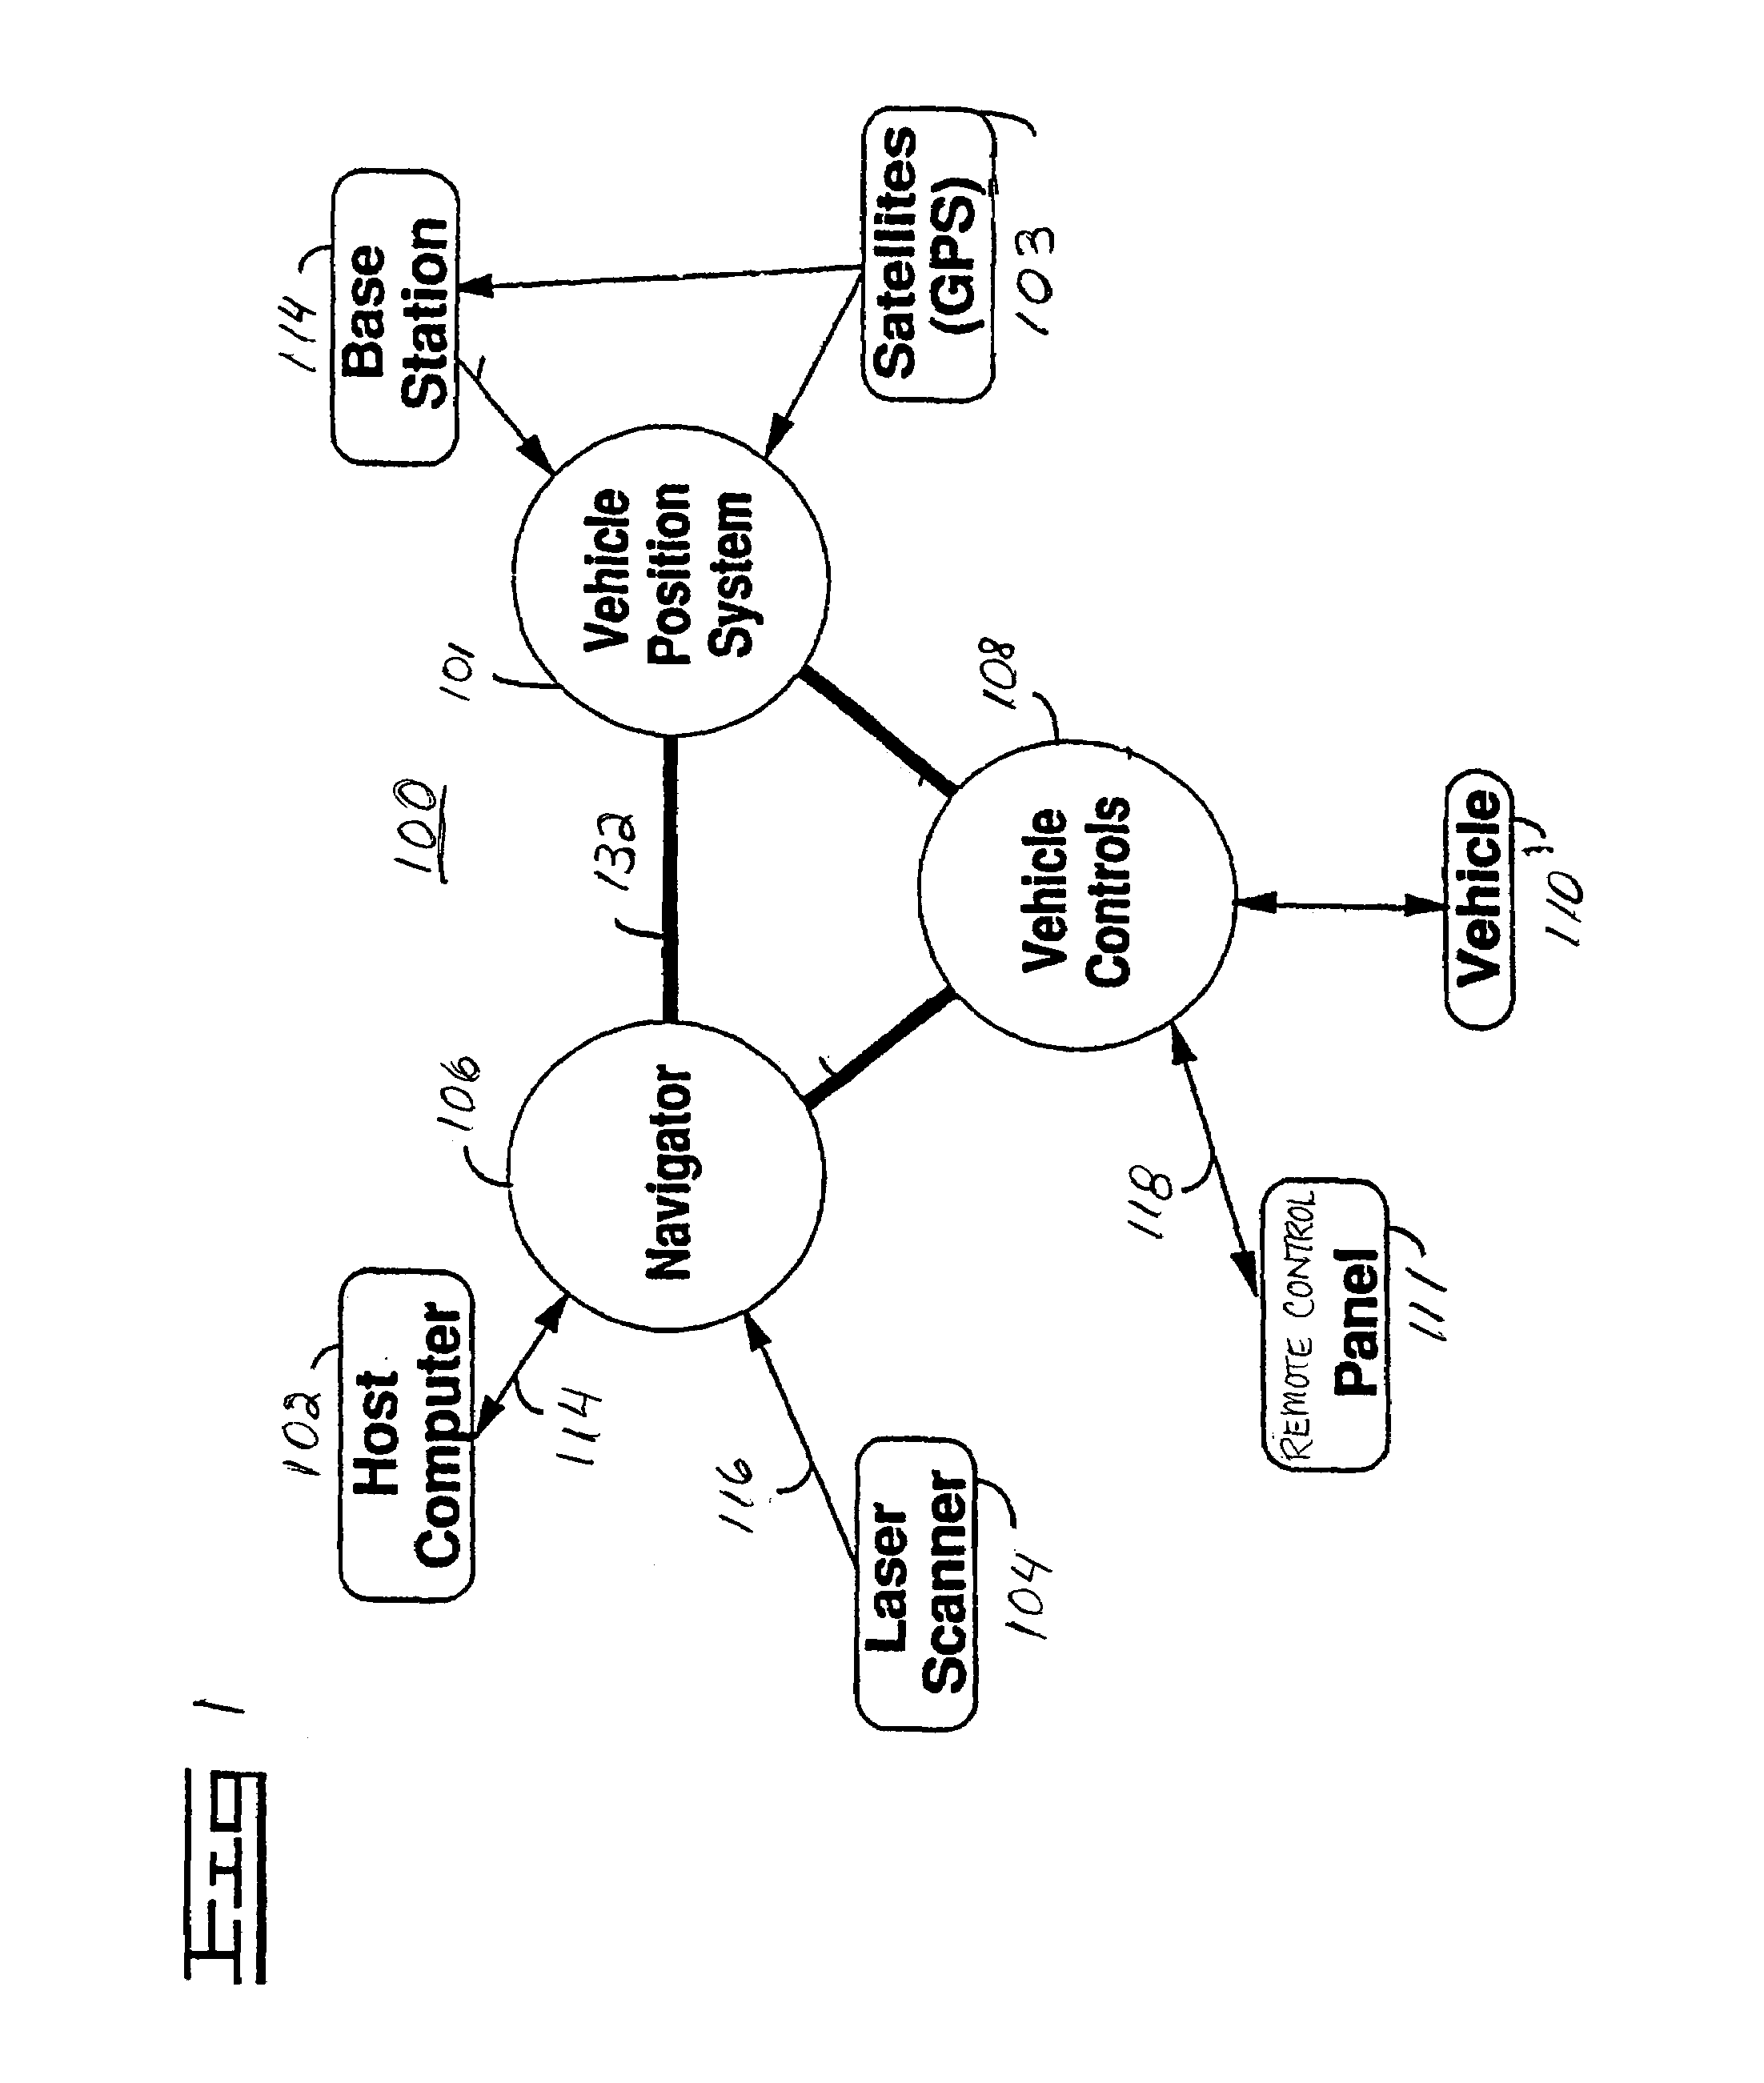 Method and integrated system for networked control of an environment of a mobile object